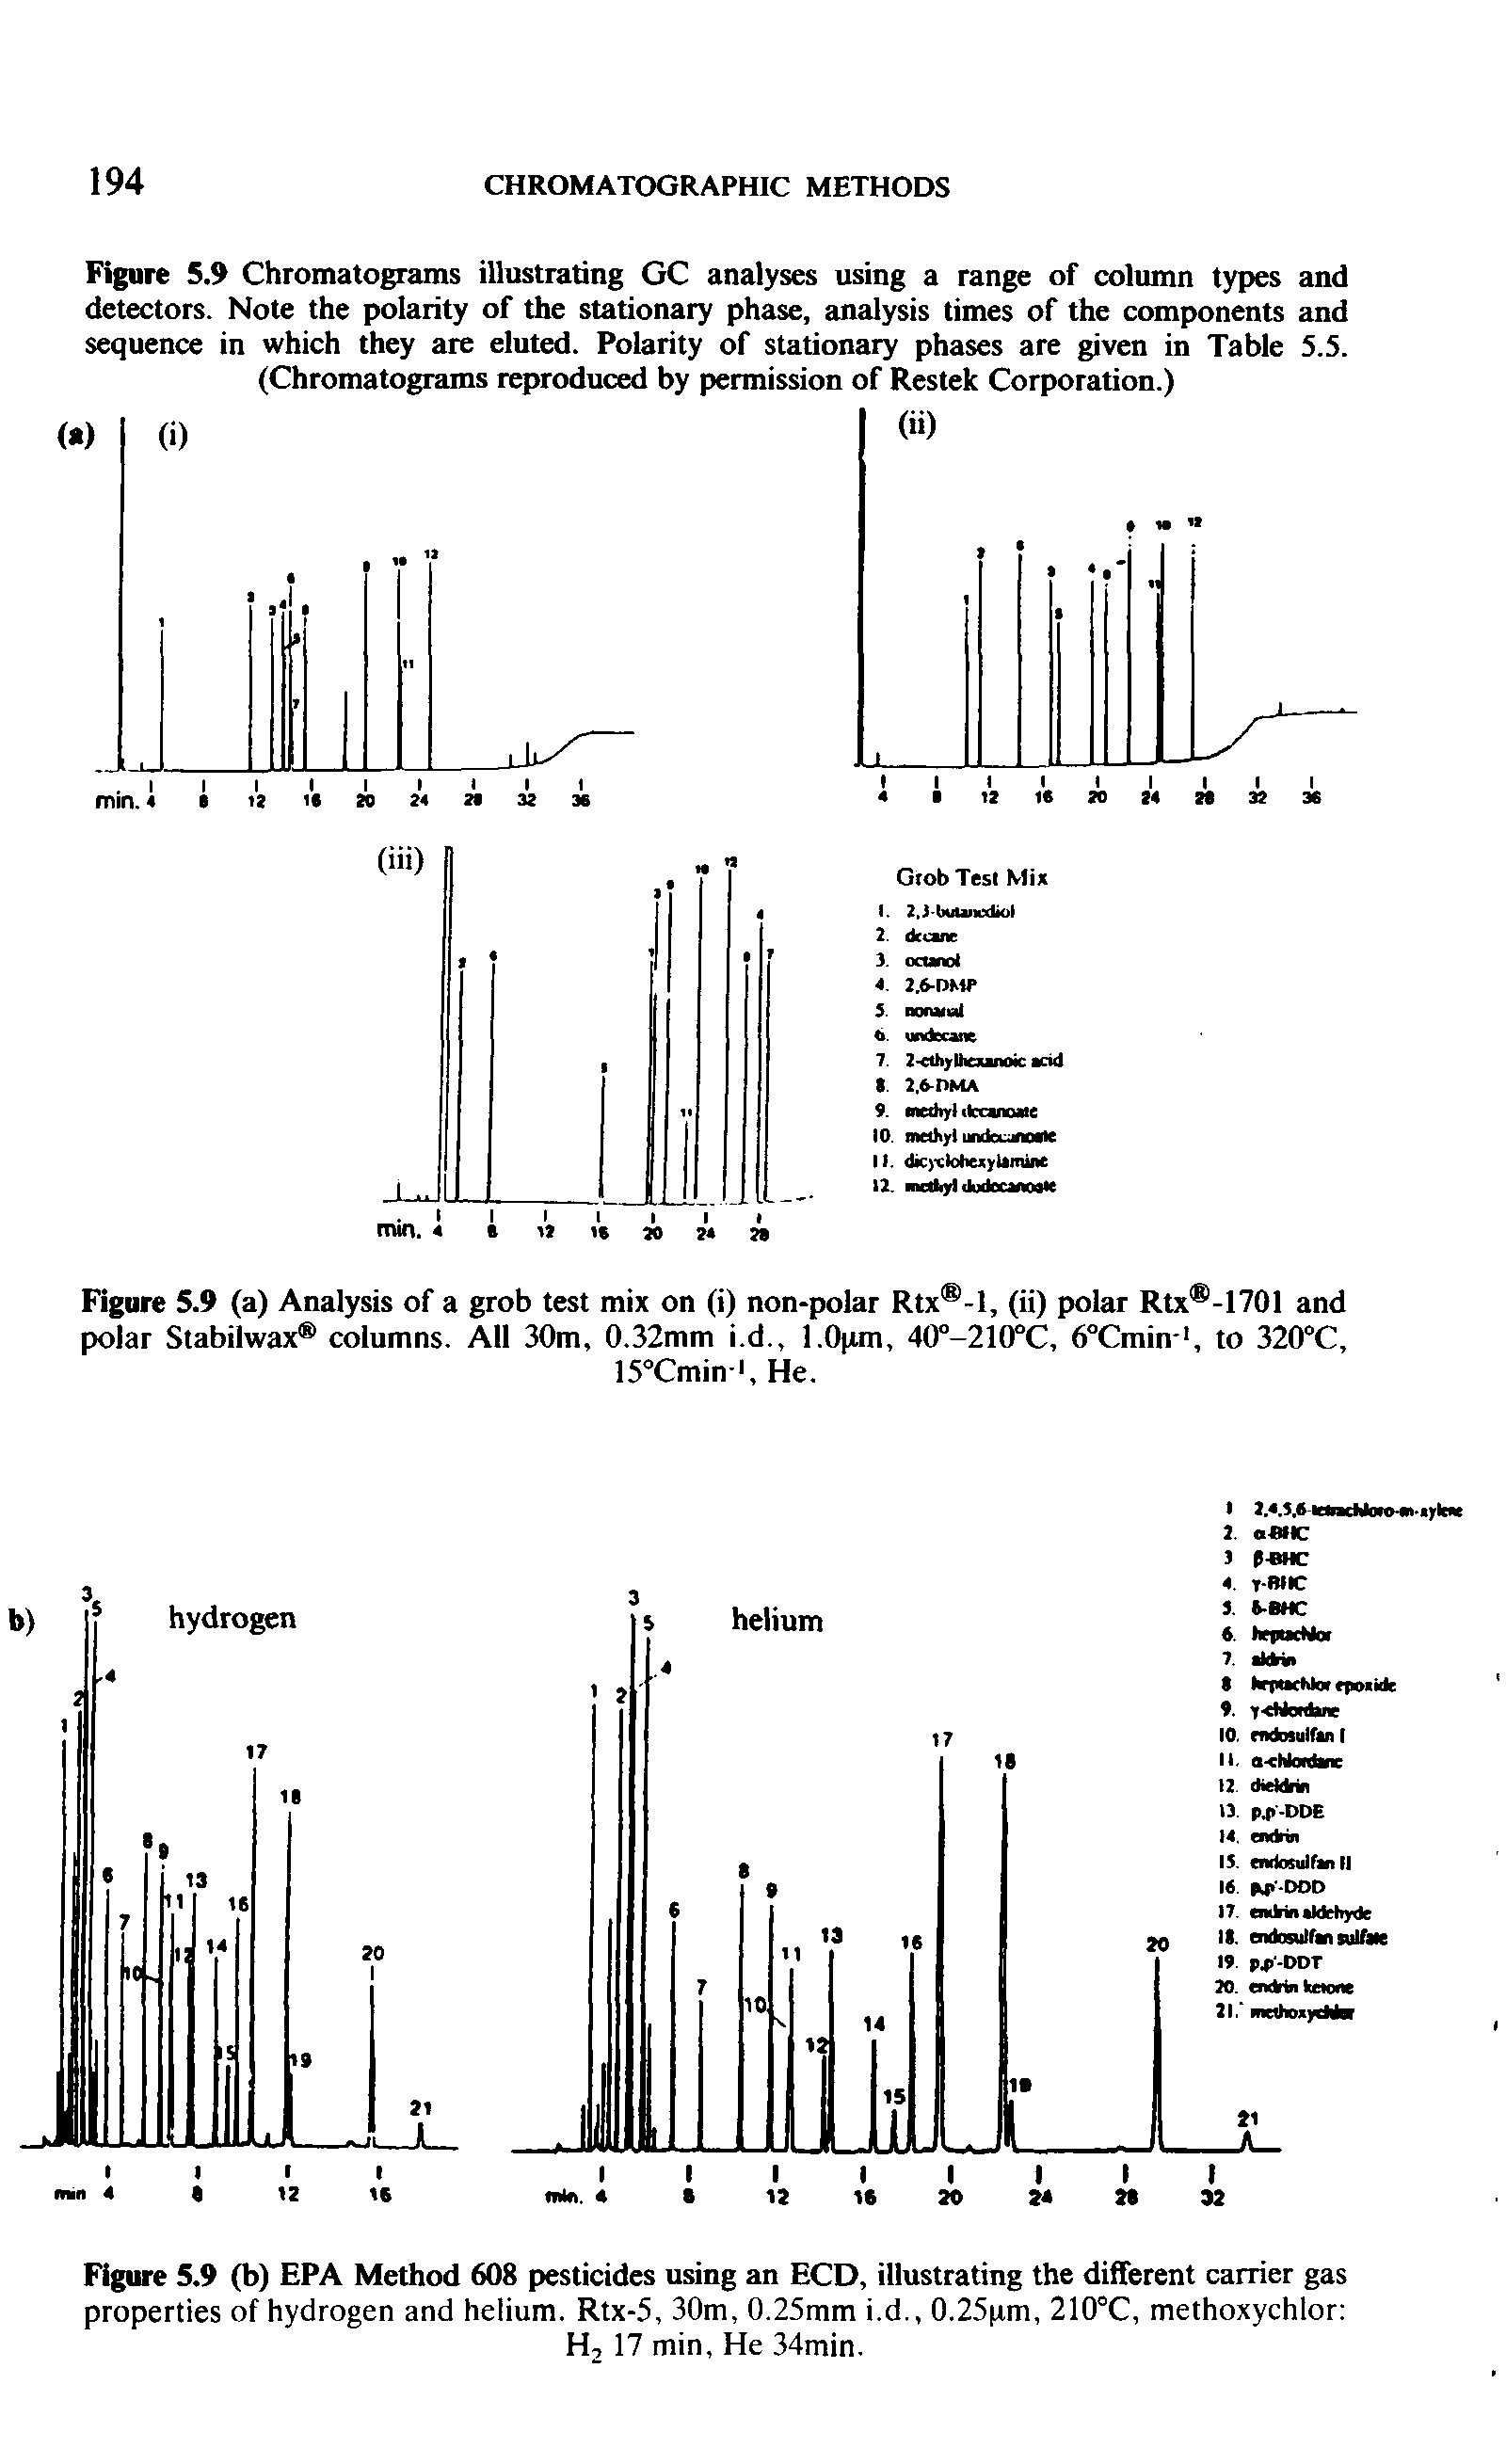 Figure 5.9 Chromatograms illustrating GC analyses using a range of column types and detectors. Note the polarity of the stationary phase, analysis times of the components and sequence in which they are eluted. Polarity of stationary phases are given in Table 5.5. (Chromatograms reproduced by permission of Restek Corporation.)...